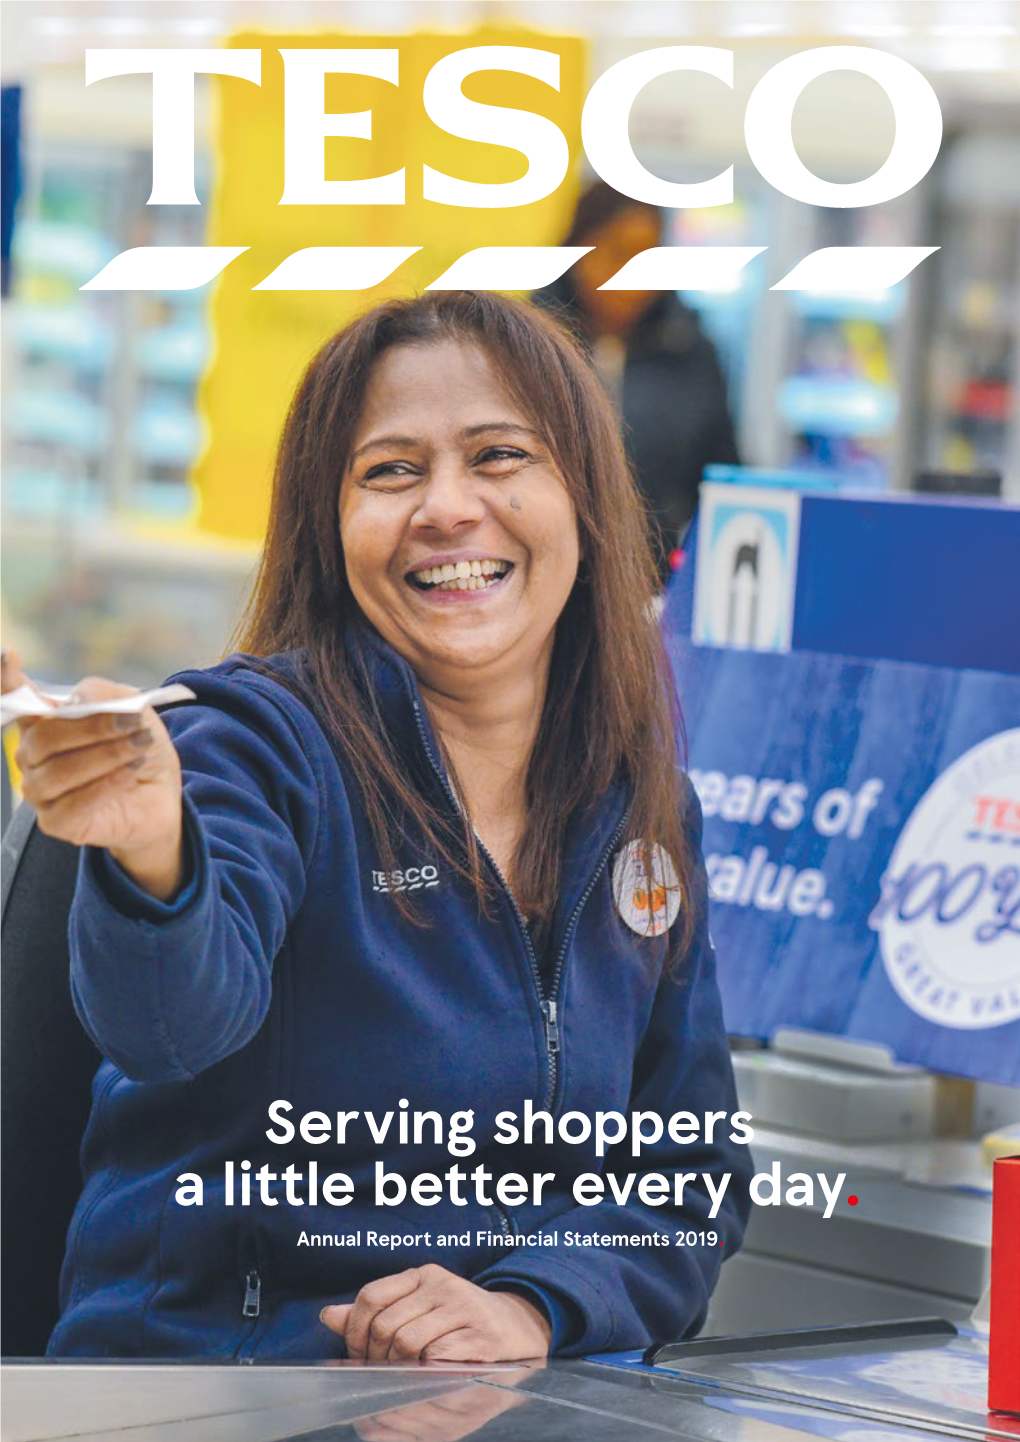 Serving Shoppers a Little Better Every Day. Annual Report and Financial Statements 2019